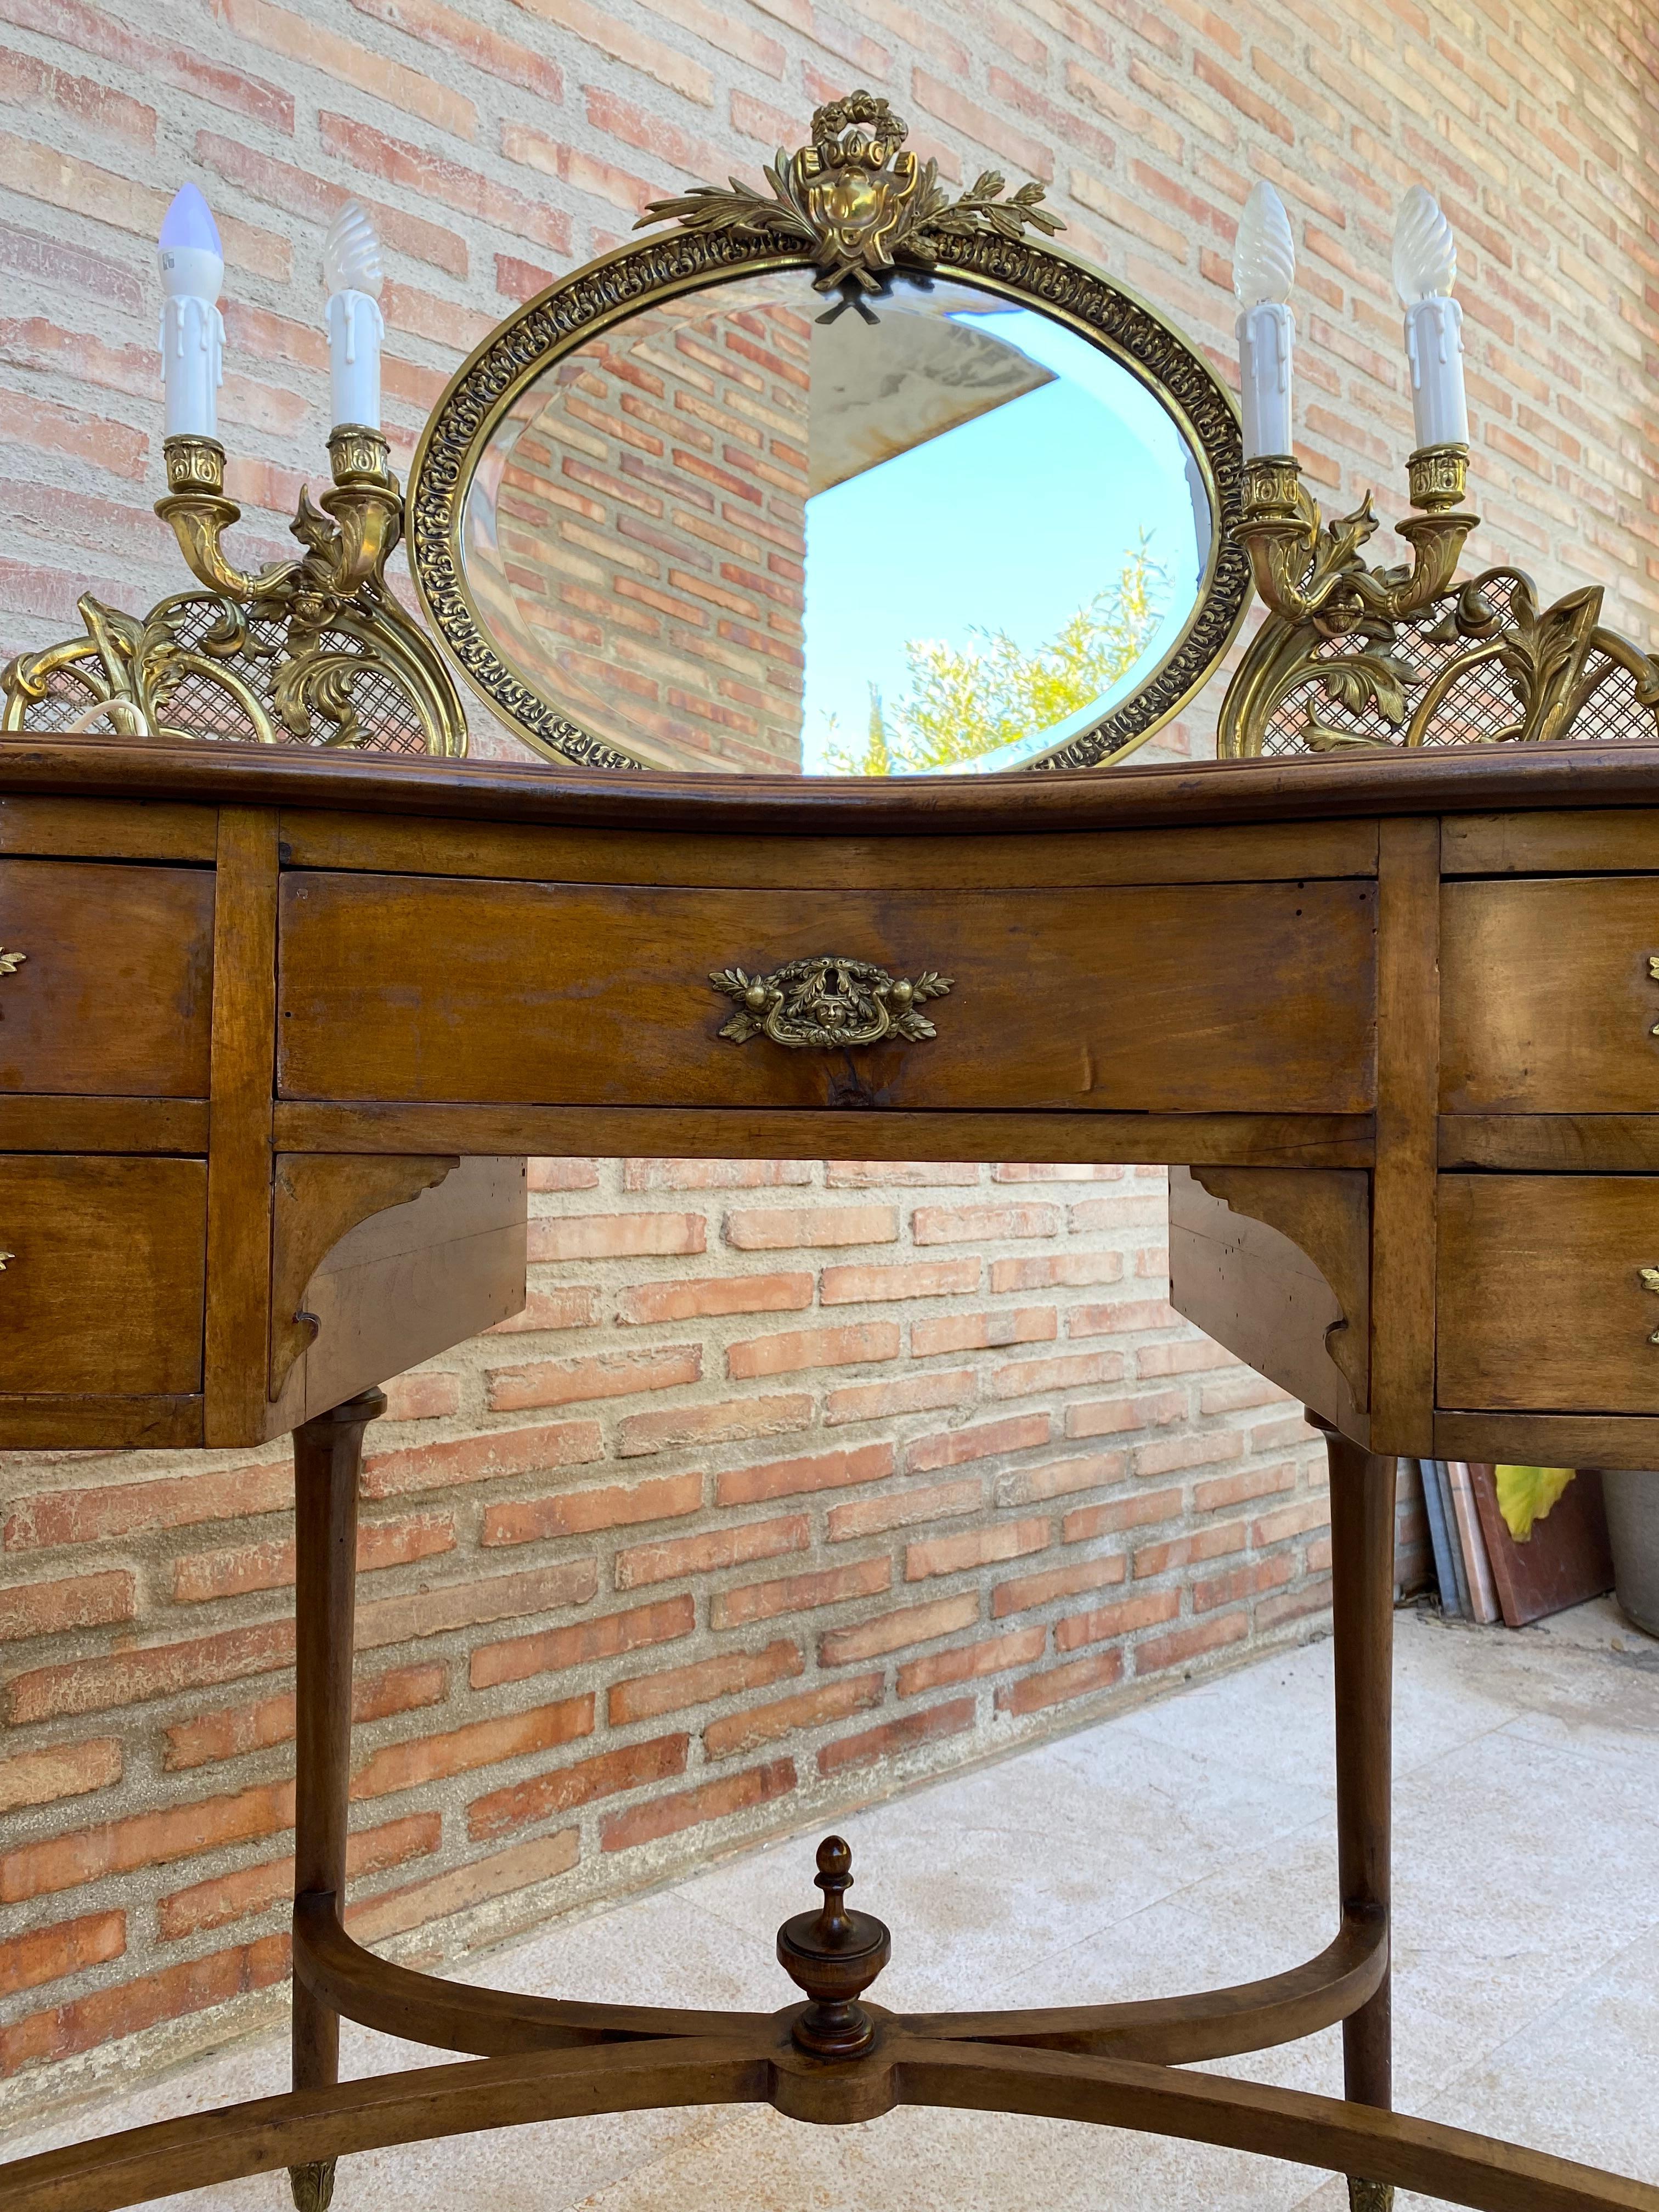 French Walnut and Bronze Vanity with Candelabra Arms For Sale 1